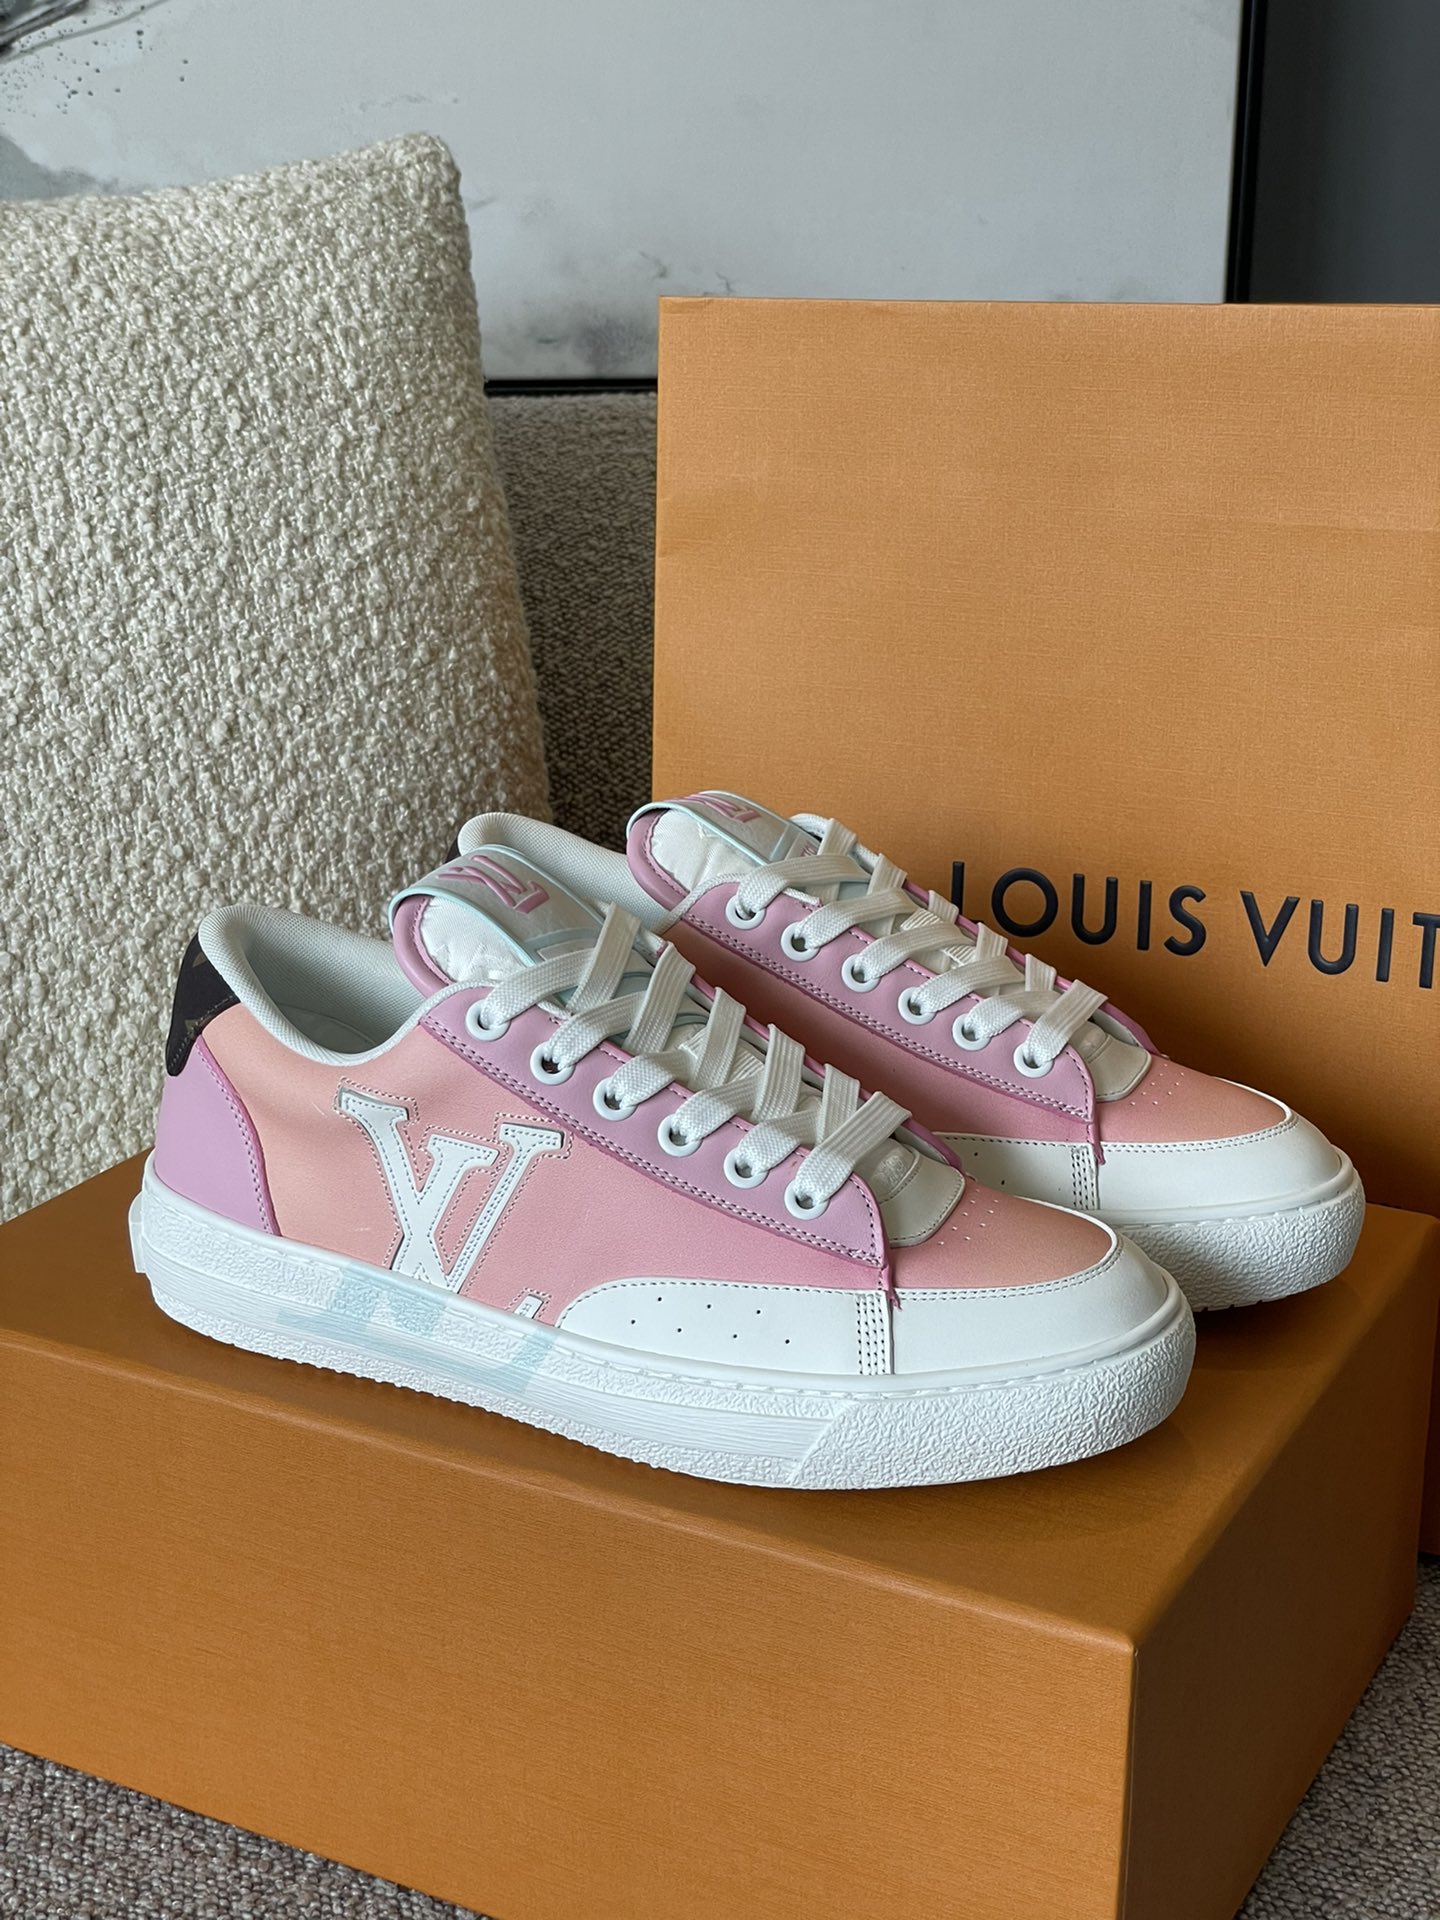 Louis Vuitton Shoes Sneakers Pink Splicing Calfskin Cowhide Spring/Summer Collection Sweatpants